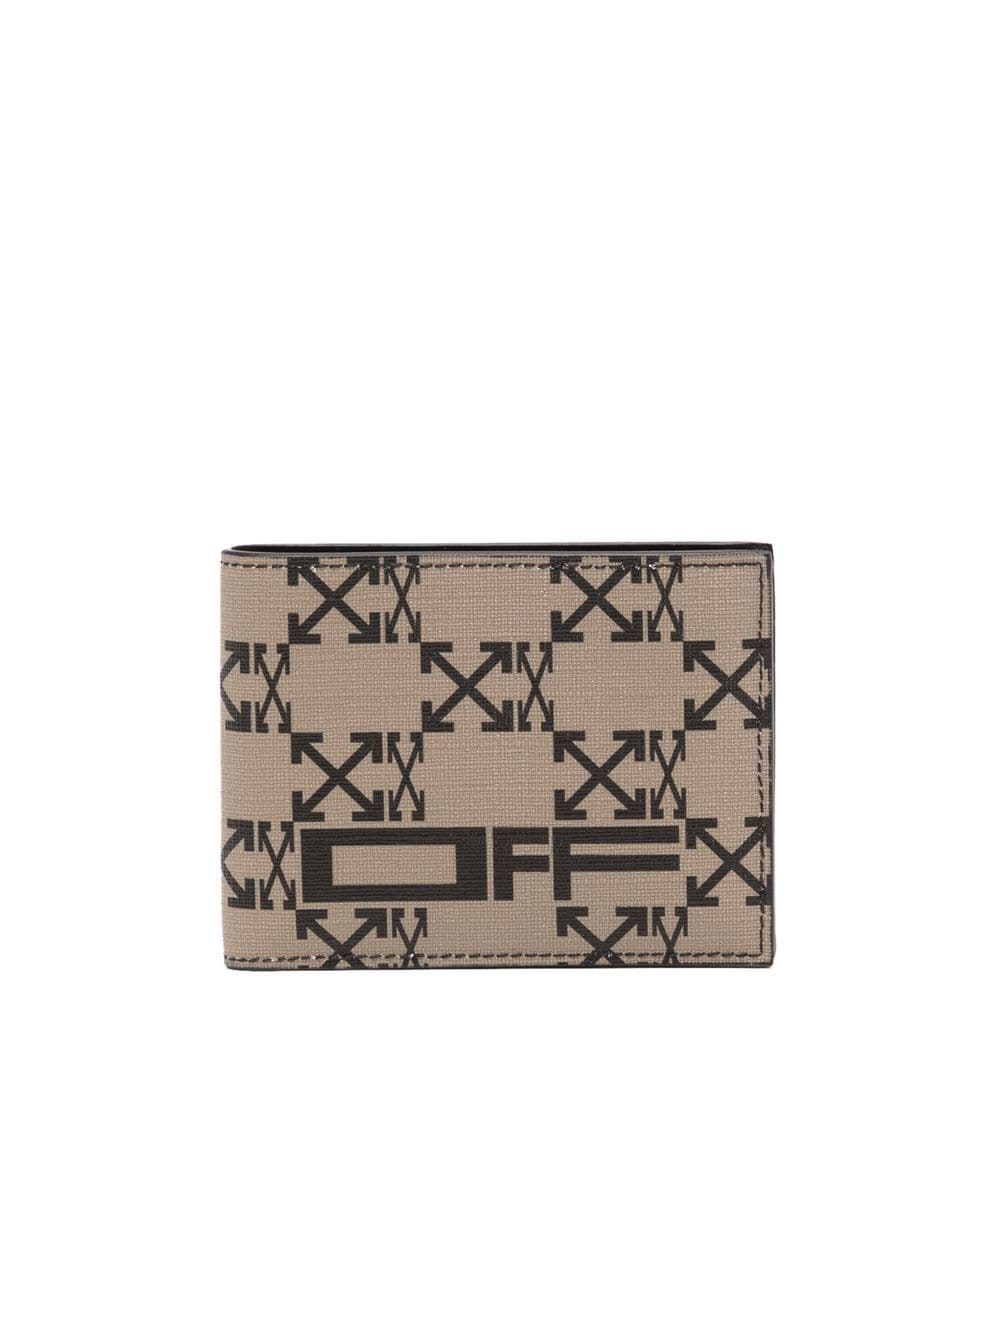 OFF-WHITE ALL-OVER LOGO BIFOLD WALLET